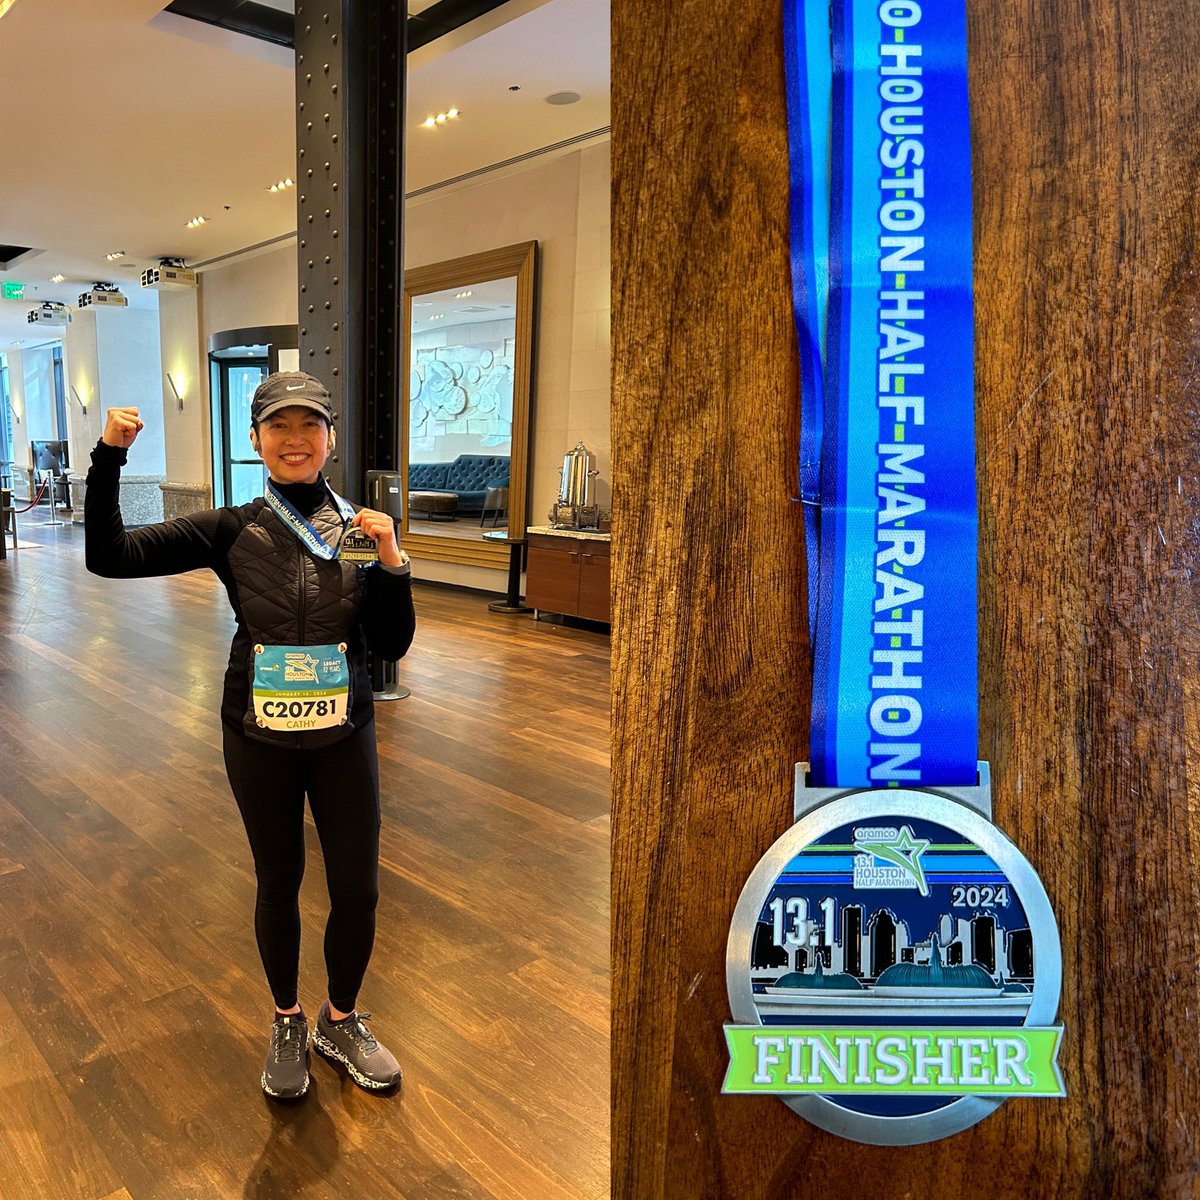 🏃🏻‍♀️the half @HoustonMarathon before heading to #ASCOGI24 and l💕 💕it! My #cancer patients are my #motivation to cross the #finishline! GREAT way to see #Houston and reacquaint myself!! @FightCRC #legacyrunner @VUMC_Cancer @VUMCDiscoveries @VUMCHemOnc #CancerResearch #wellness